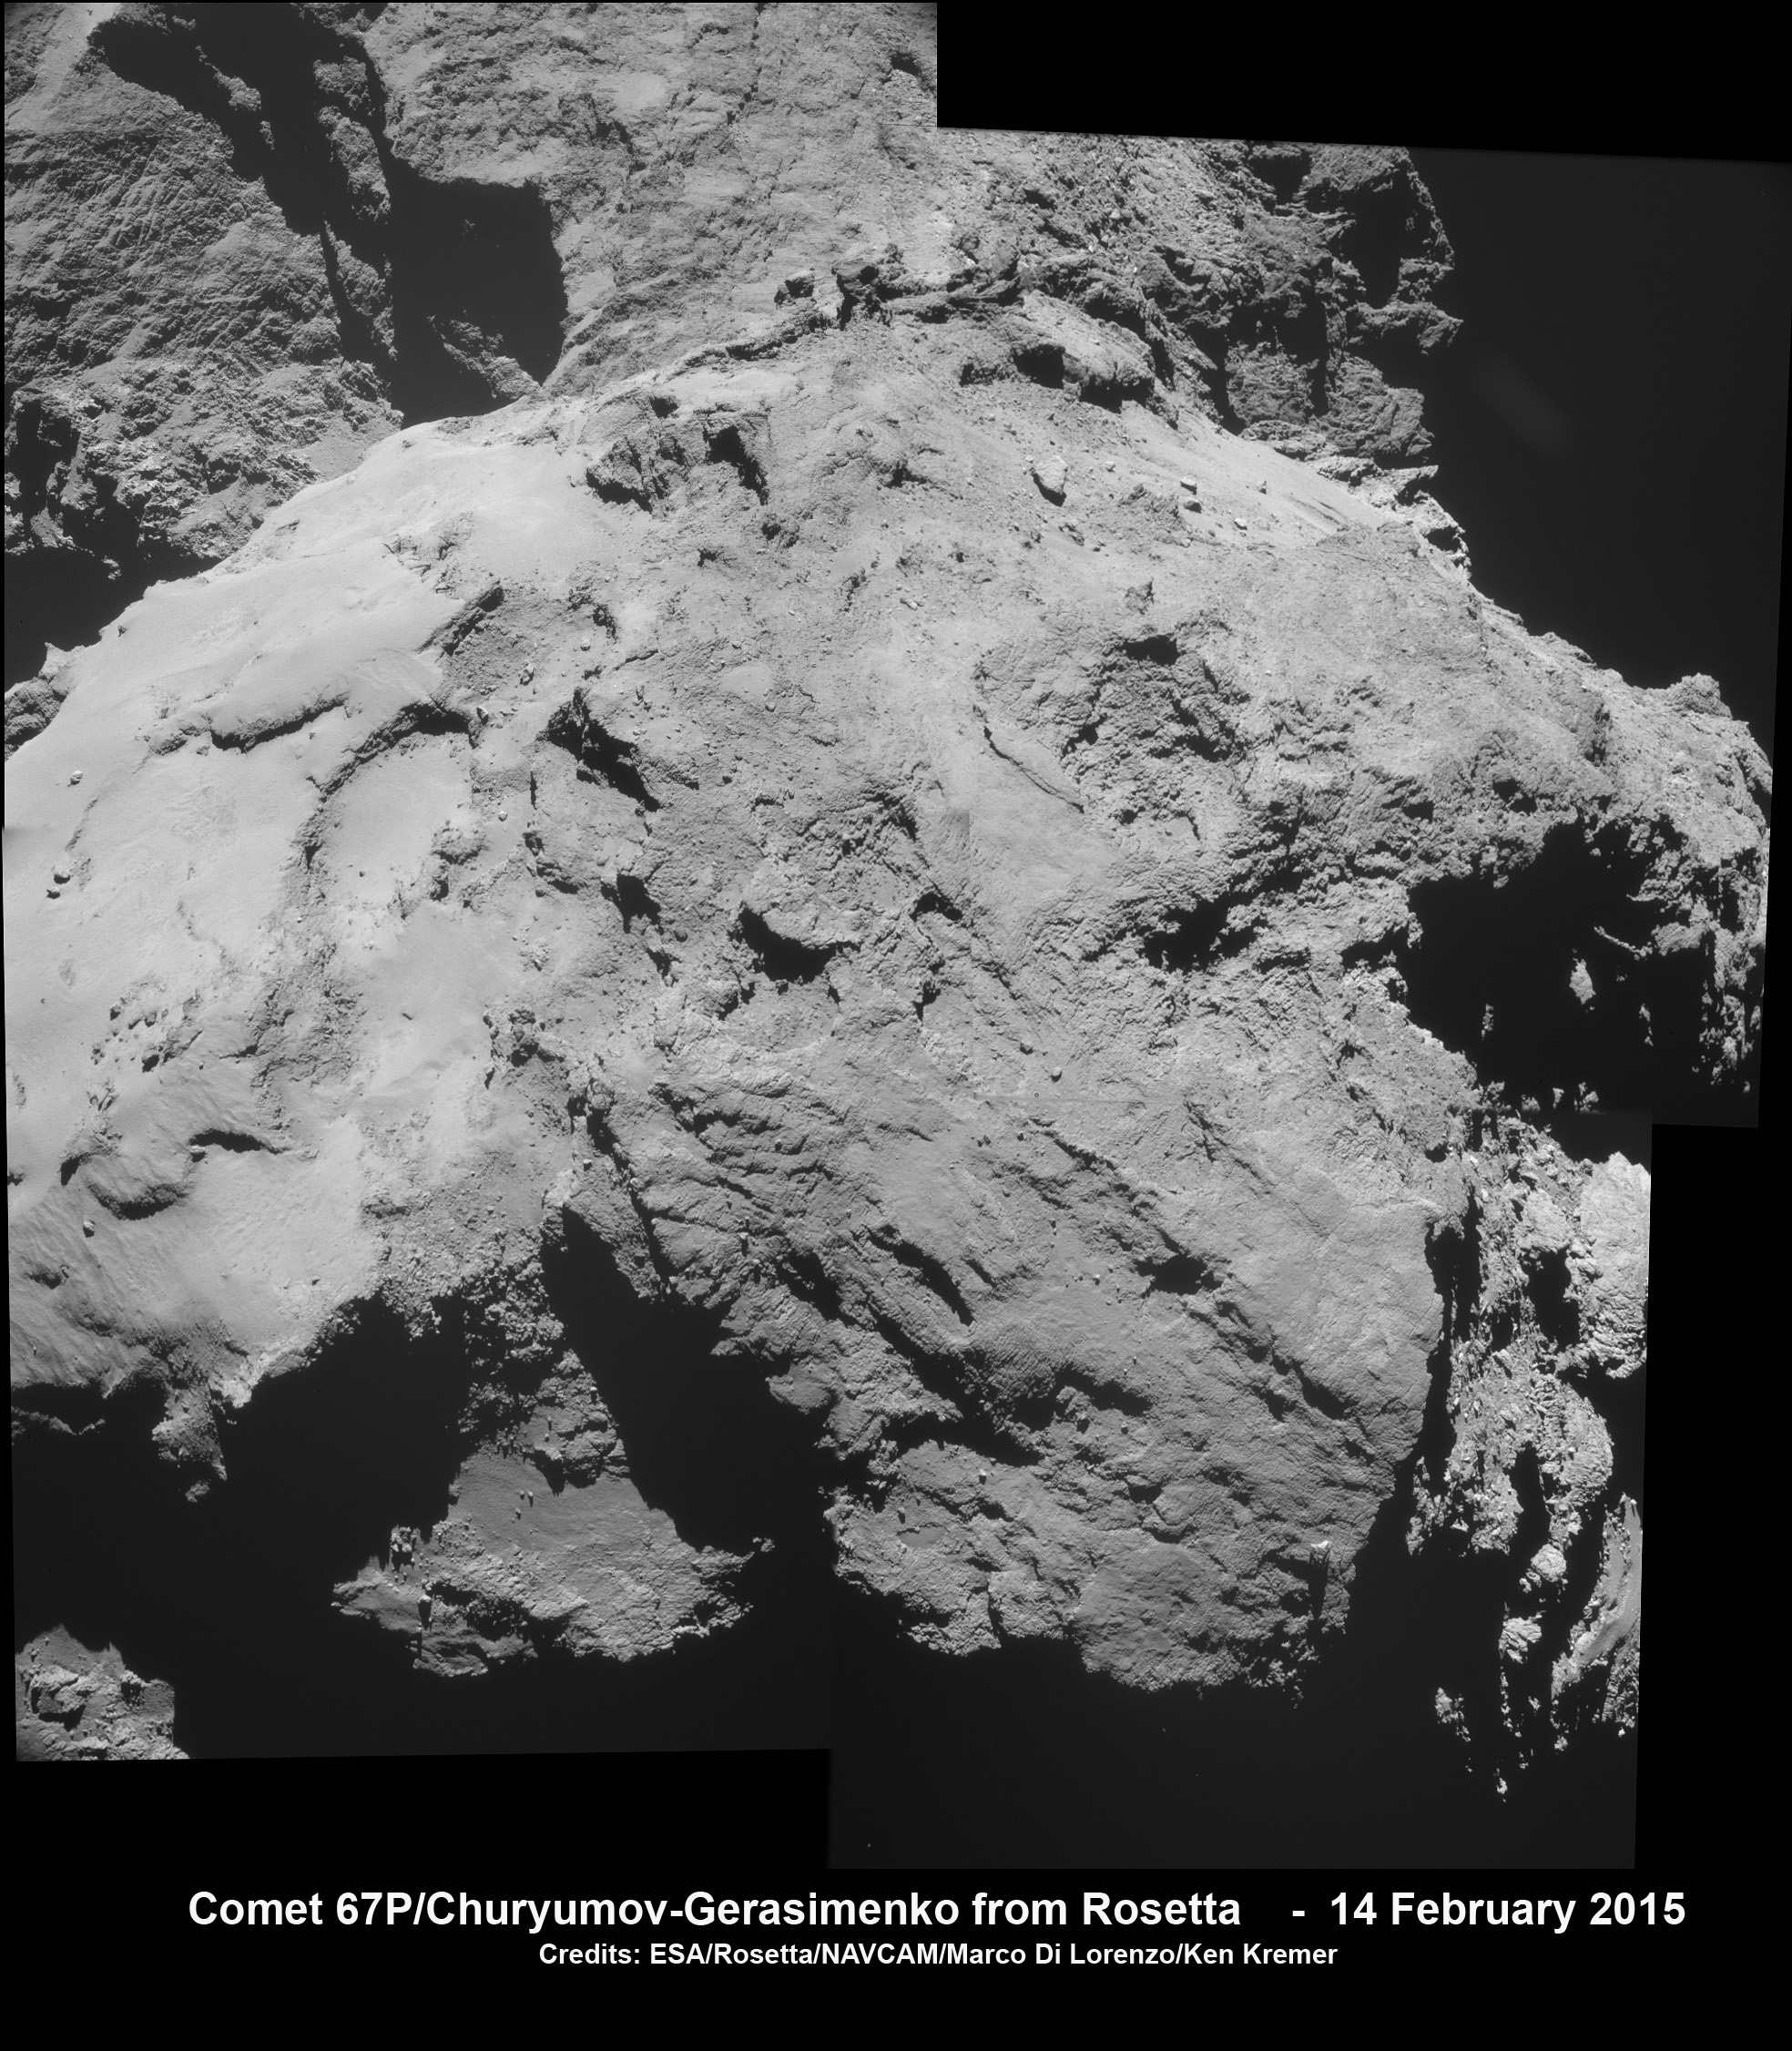 Backside view of Comet 67P/Churyumov-Gerasimenko.  Four image mosaic of Comet 67P/Churyumov-Gerasimenko comprising images taken on 14 February 2015 at 10:15 GMT just prior to closest approach from a distance of 12.6 km from the comet centre (about 10.6 km from the surface). For the comet centre distance, the image scale is 1.1 m/pixel. In this orientation the view is across the ‘back’ of the large comet lobe, with the ‘neck’ and the small comet lobe towards the top of the image.  Credits: ESA/Rosetta/NAVCAM/Marco Di Lorenzo/Ken Kremer/kenkremer.com